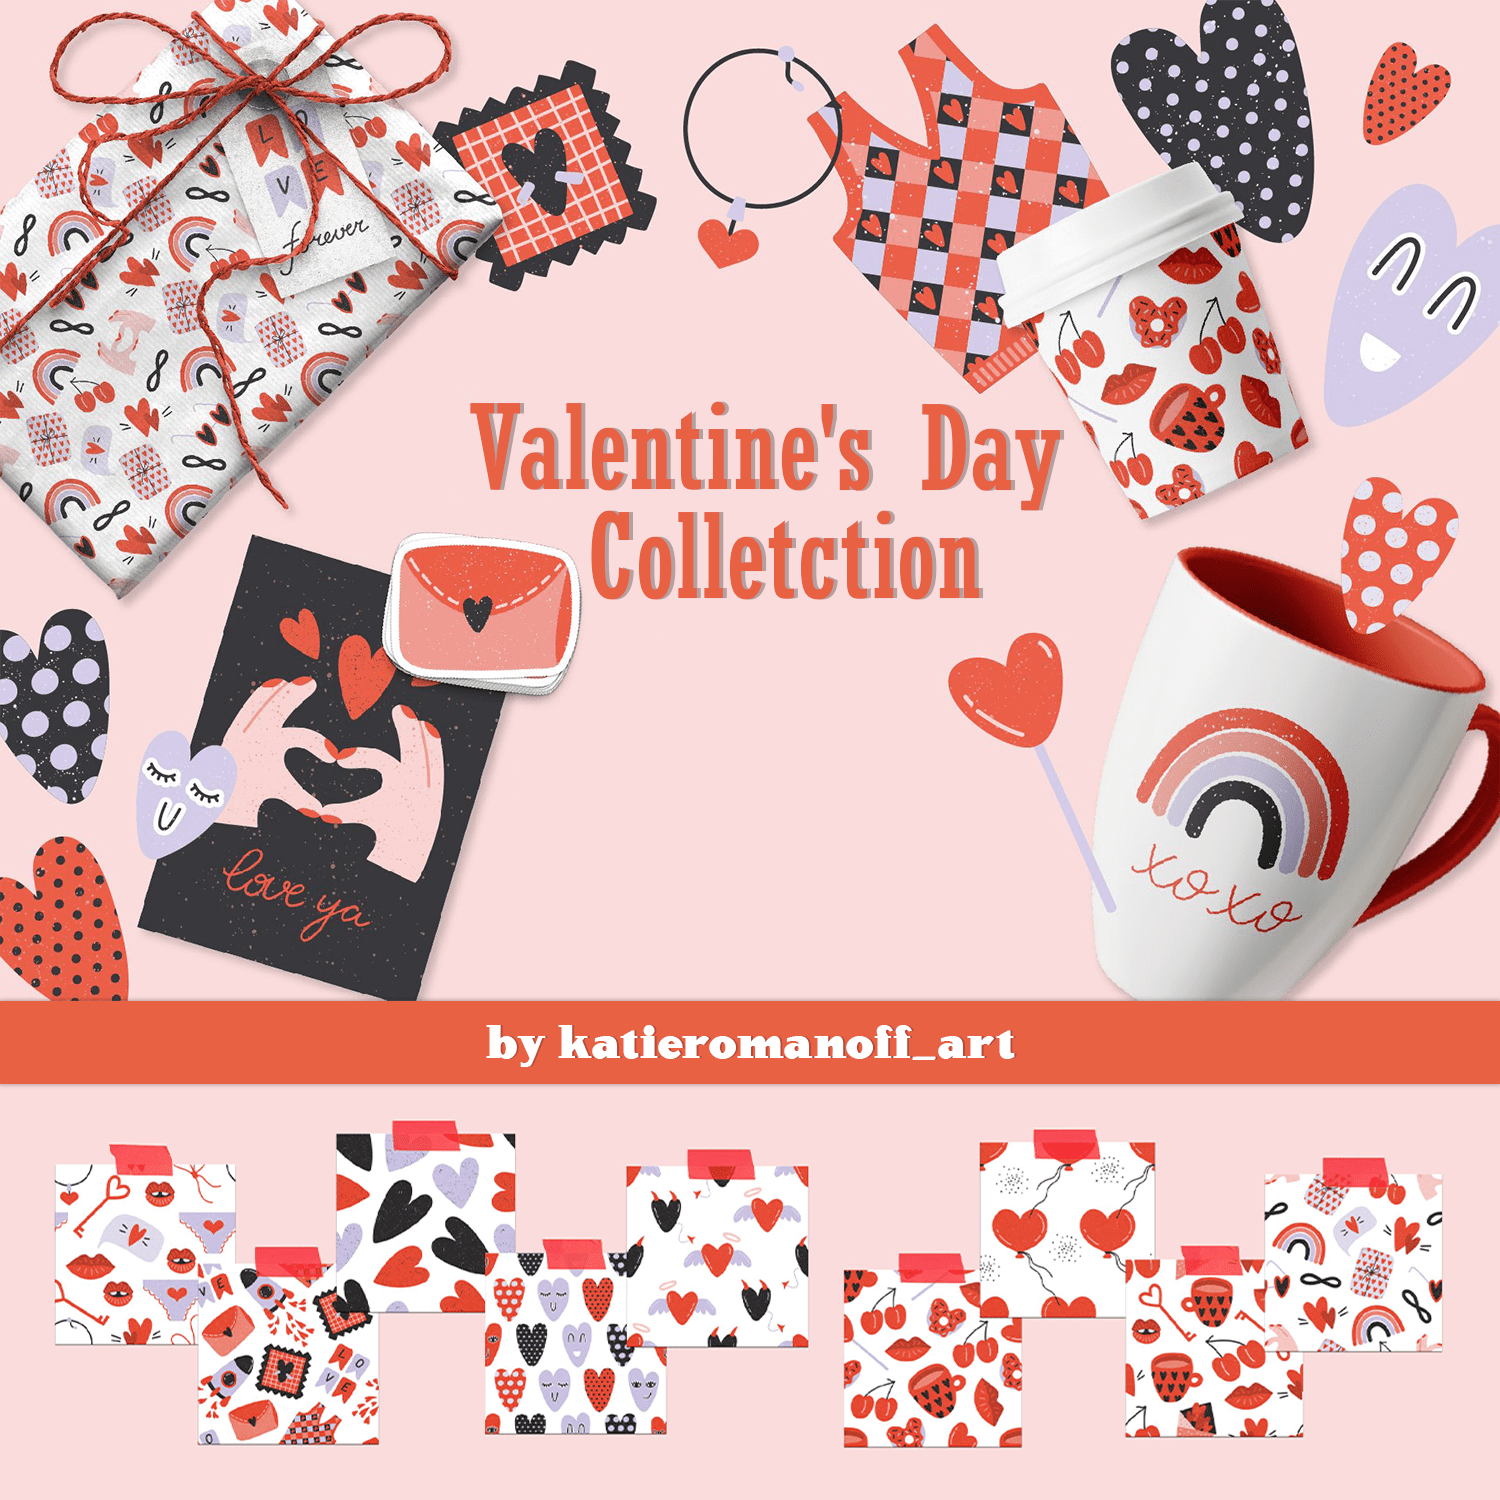 Valentine's Day Collection.